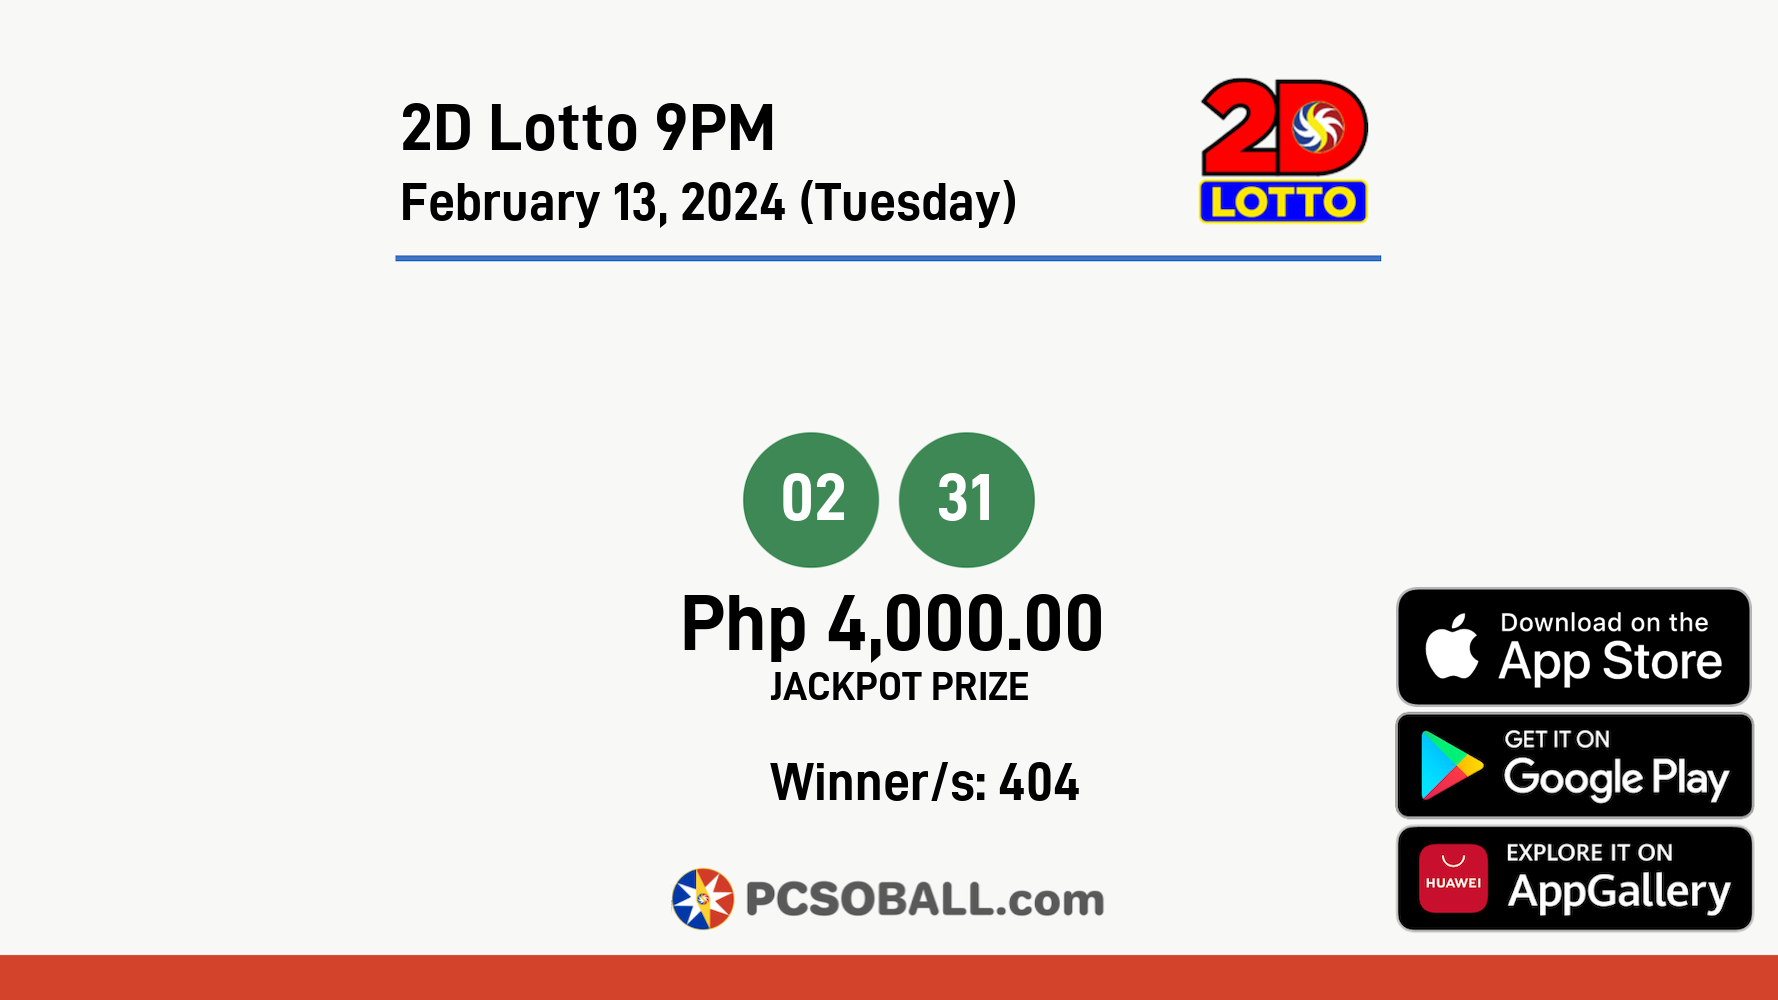 2D Lotto 9PM February 13, 2024 (Tuesday) Result